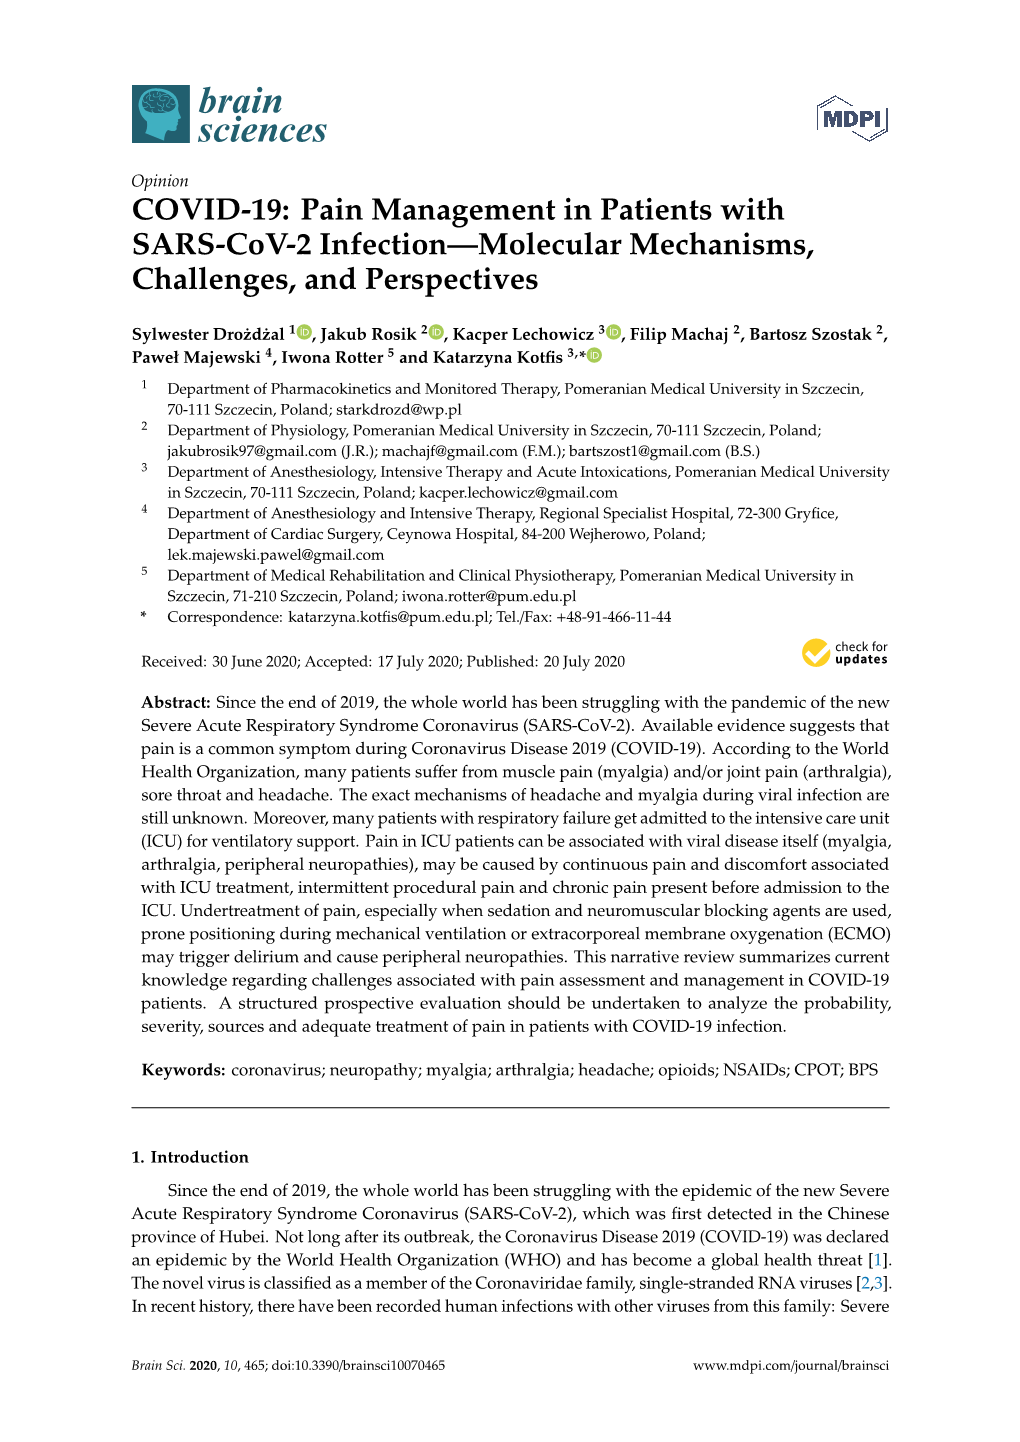 COVID-19: Pain Management in Patients with SARS-Cov-2 Infection—Molecular Mechanisms, Challenges, and Perspectives